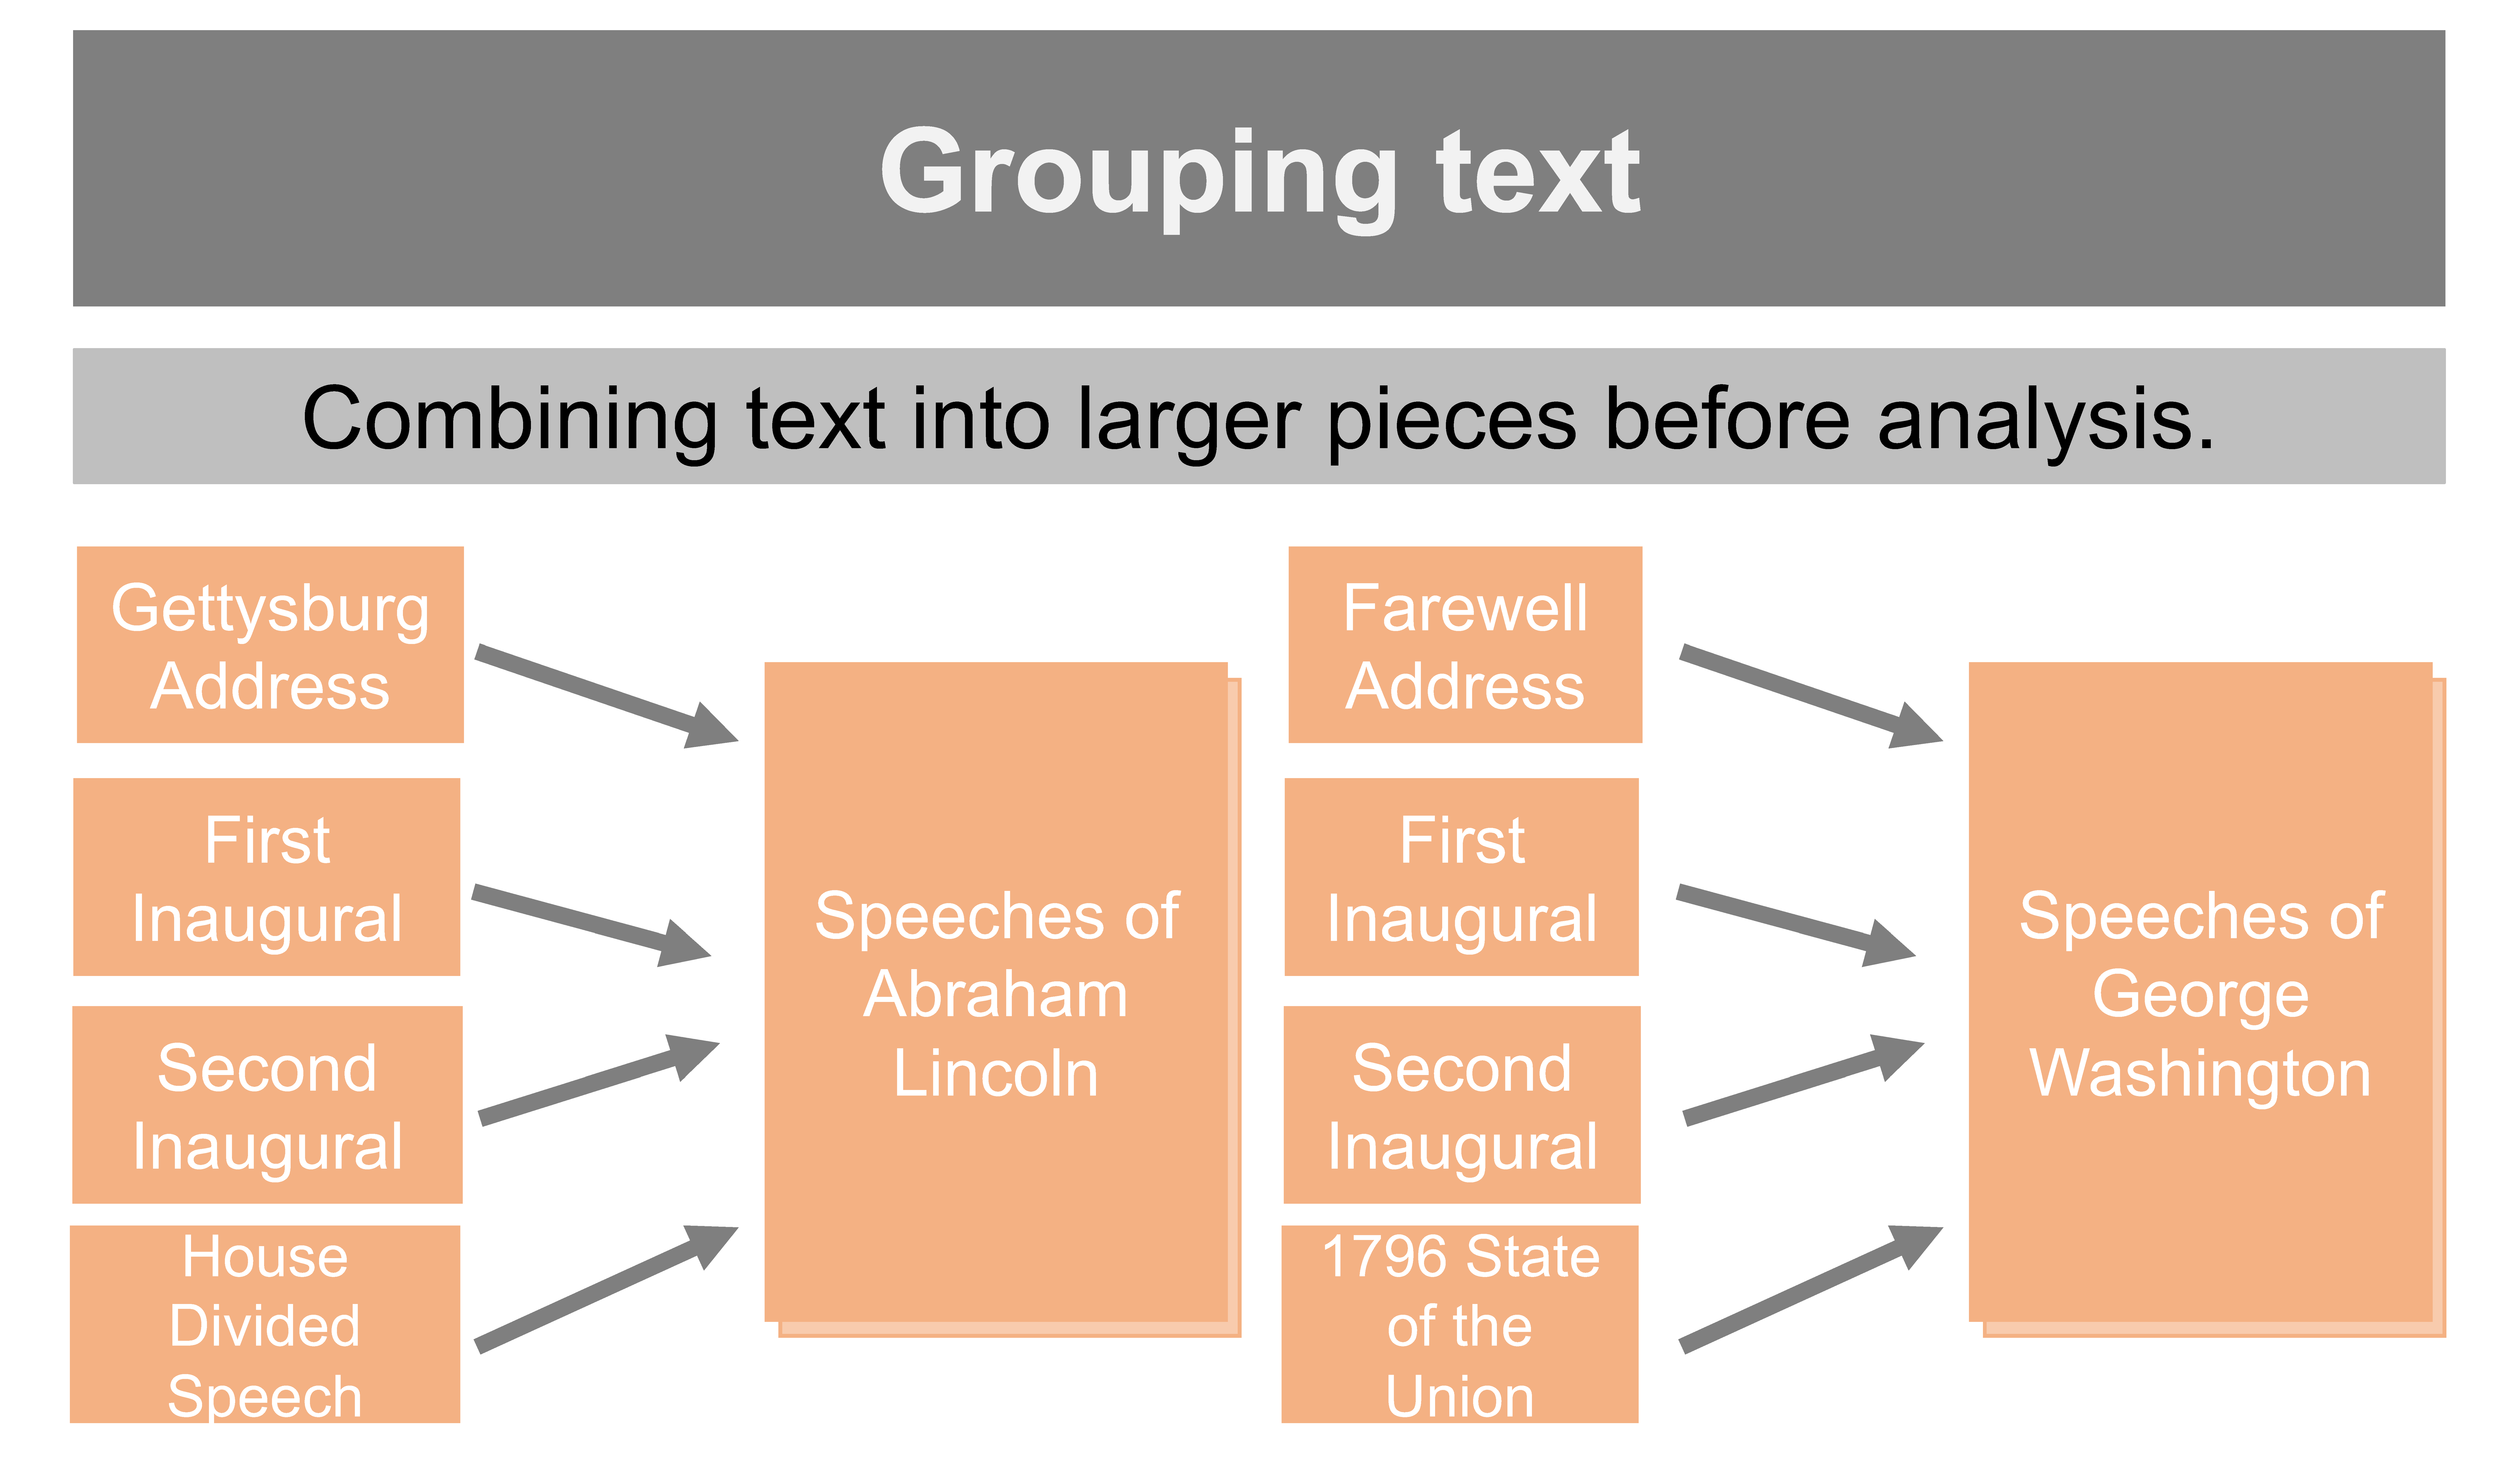 Grouping text